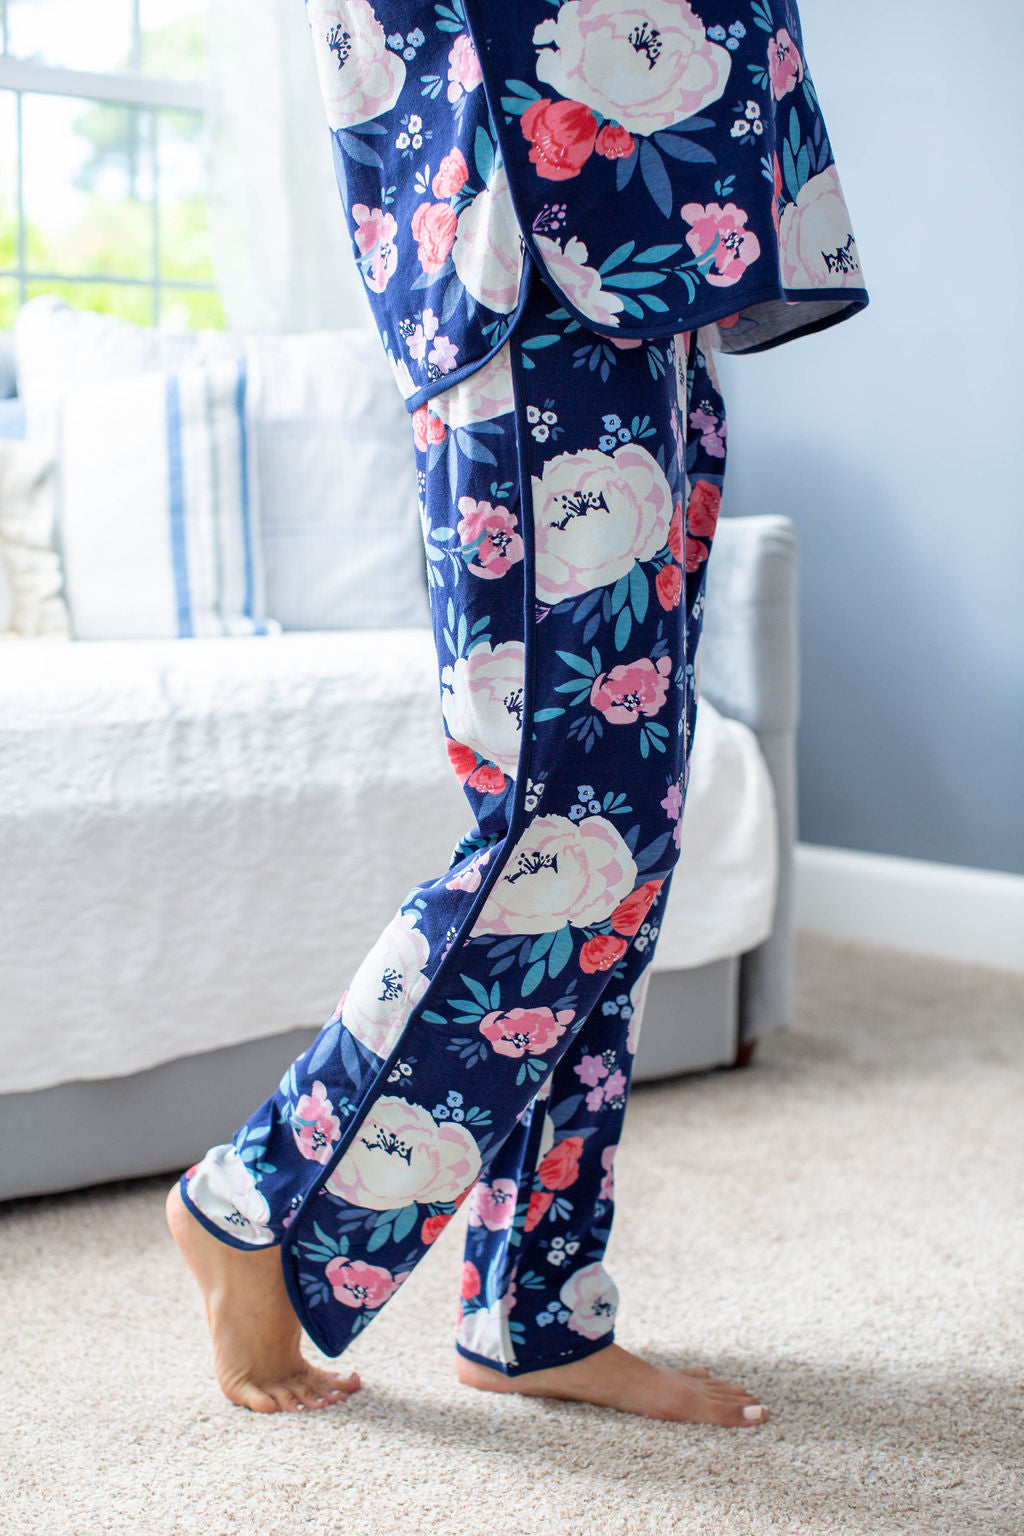 Dolphin hem pajama pants with elastic waistline and navy trim. Cream, red, and pink floral pattern. Match with big sister, big brother, Dad, and newborn.